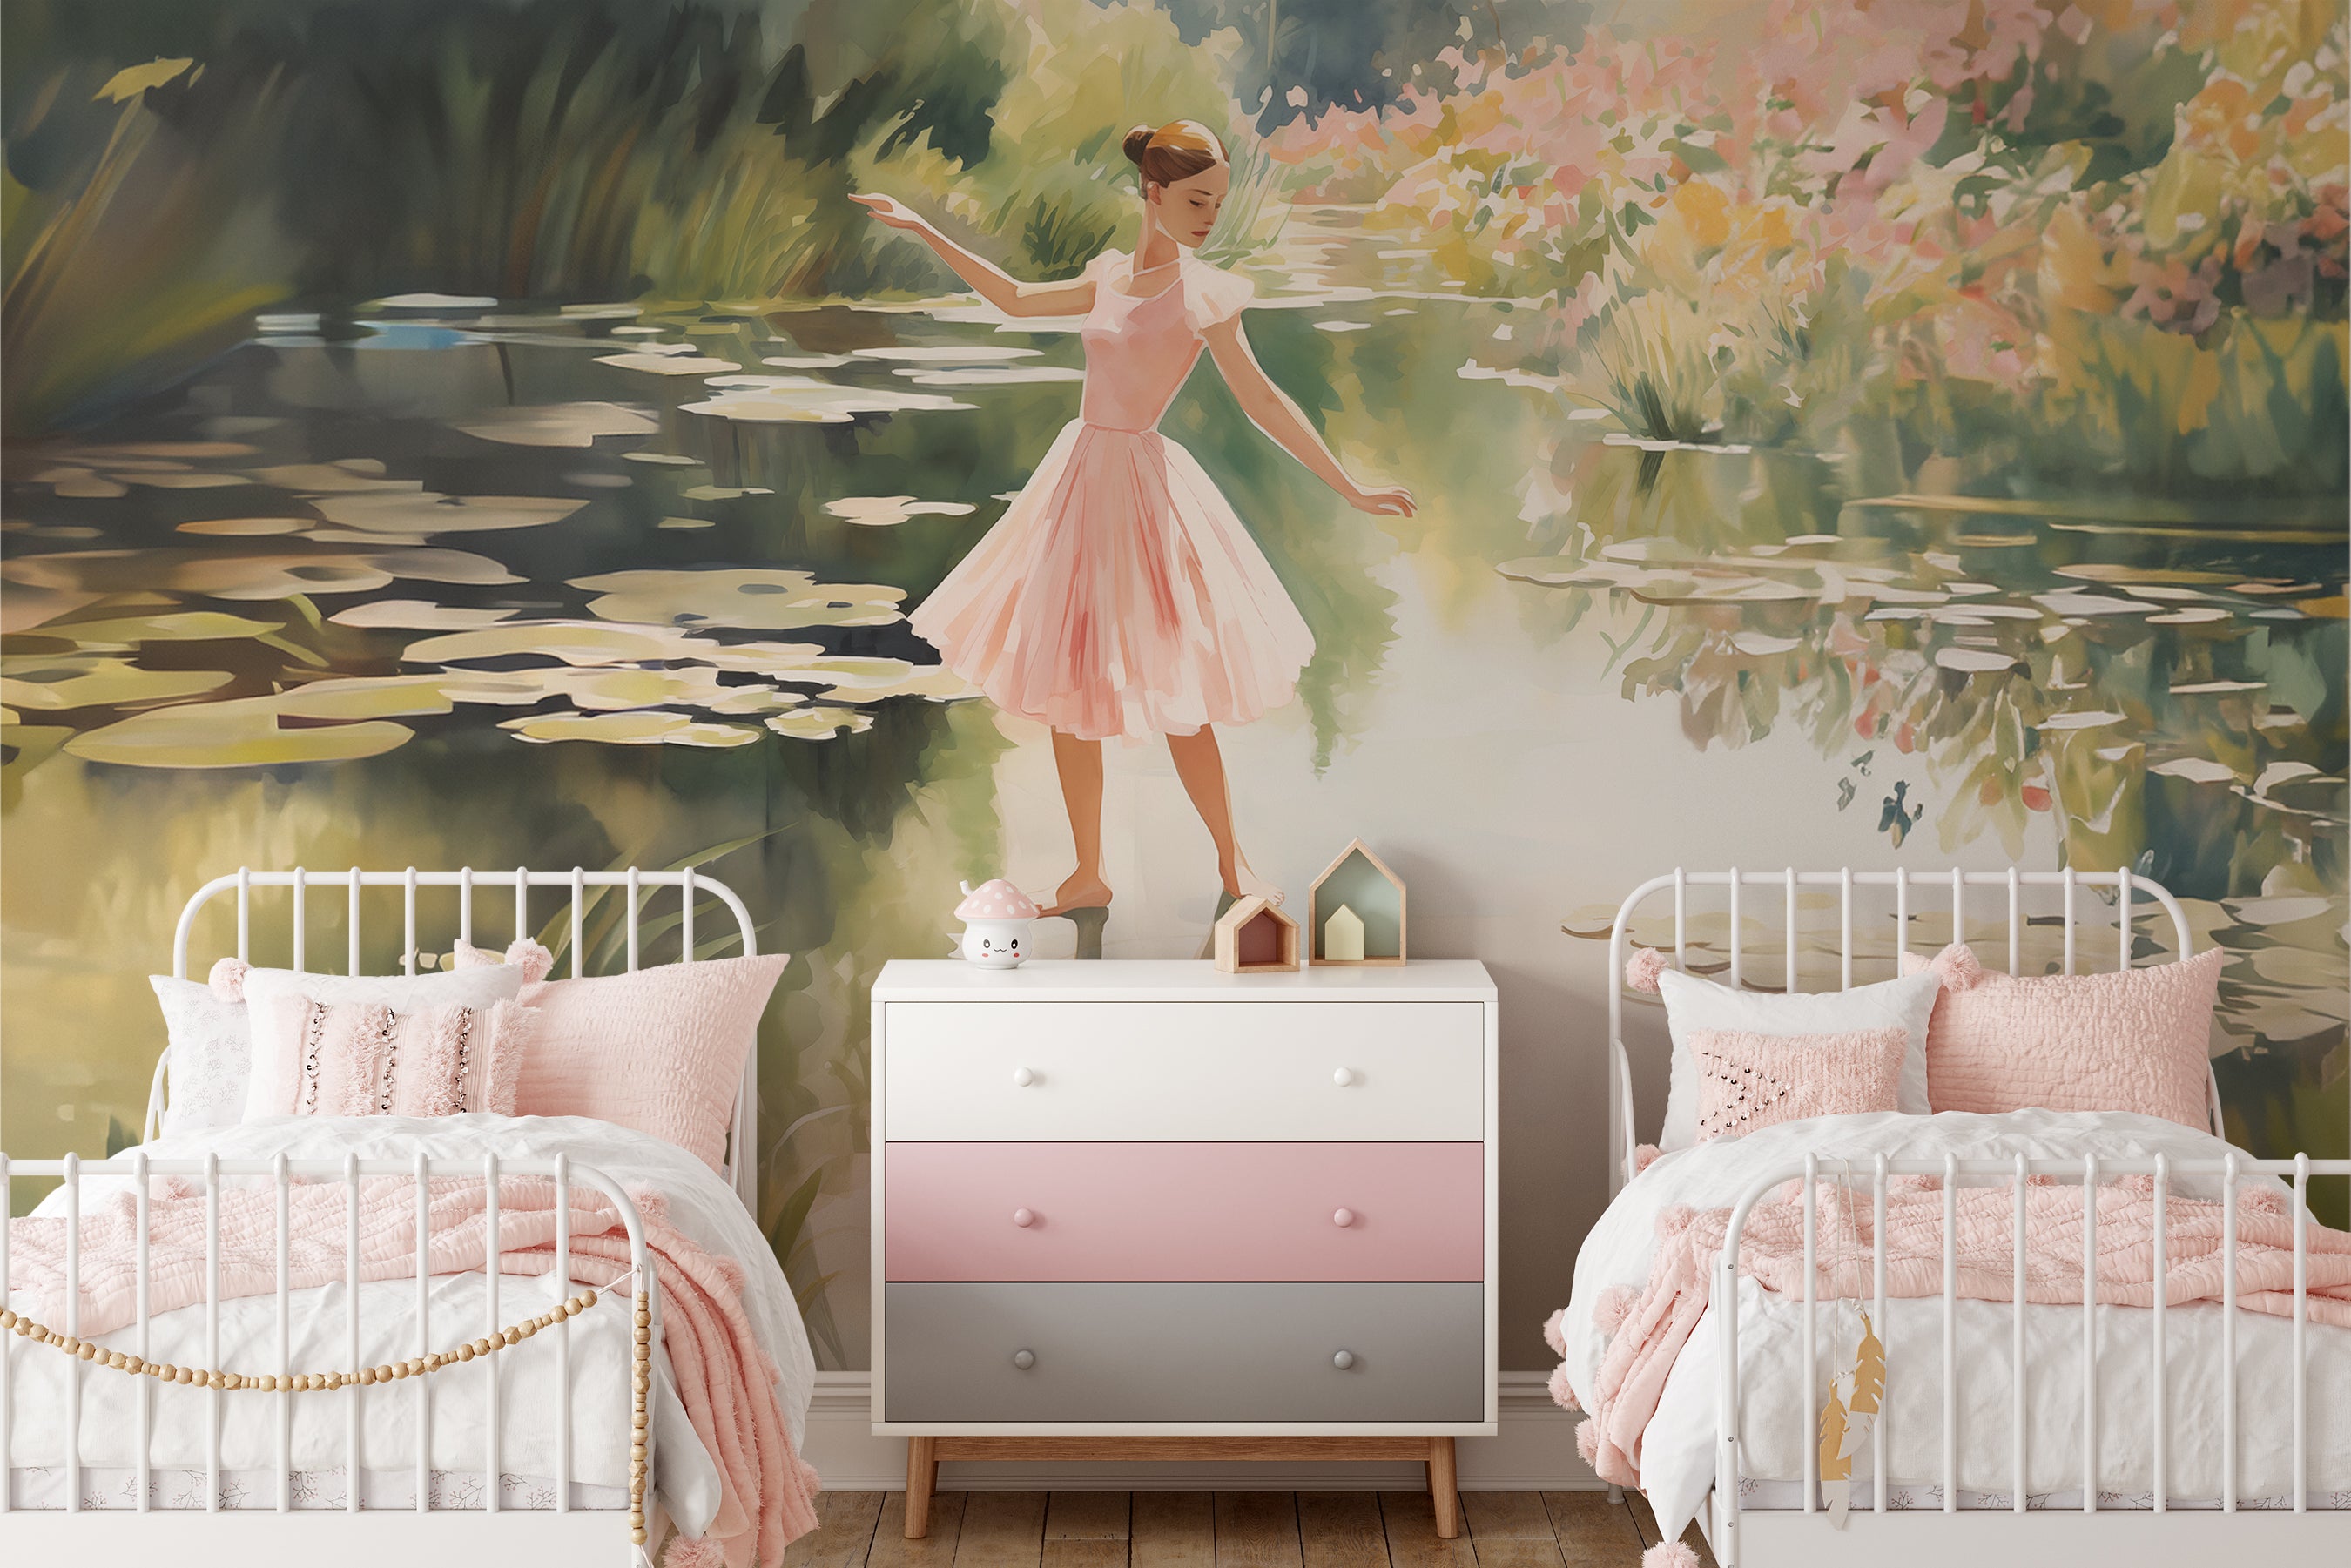 A mural of a young ballerina in a pink dress dancing on the shore of a lily-covered pond in a children's bedroom with two beds and soft pink bedding